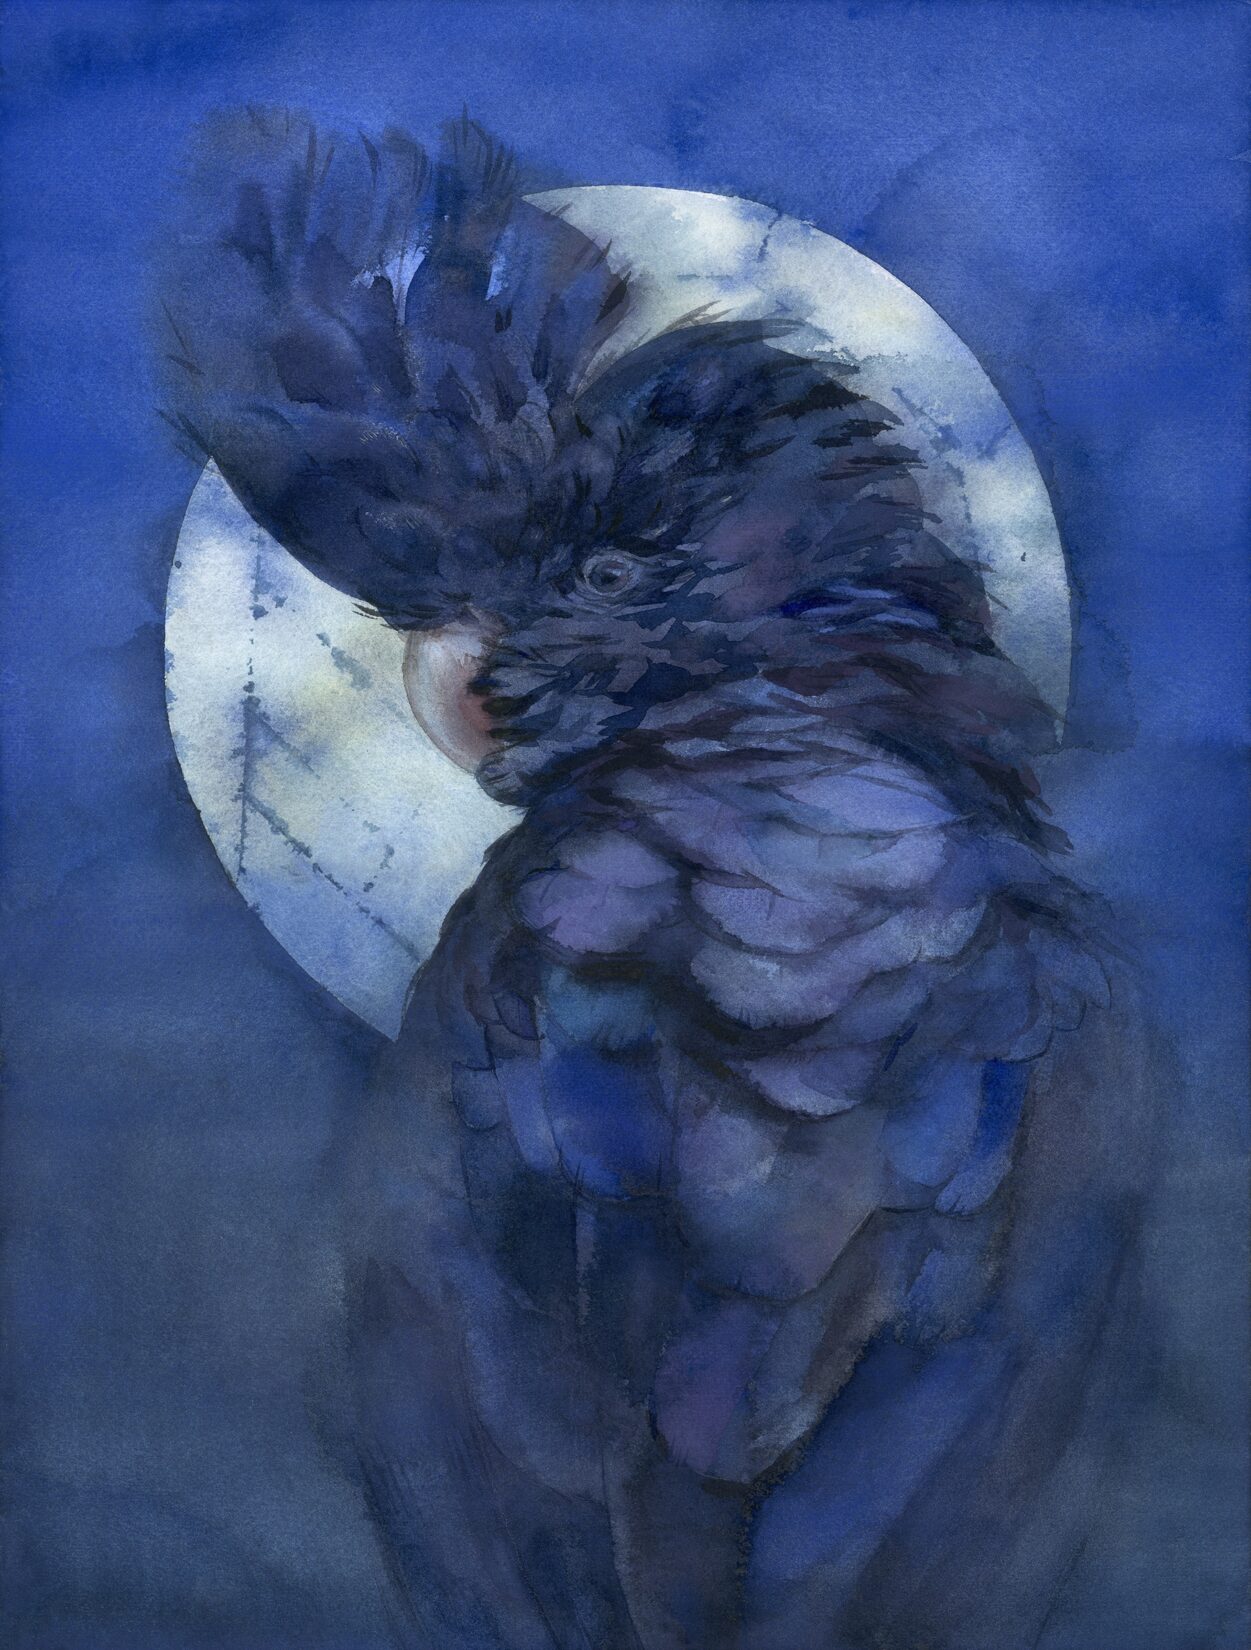 a painting of a bird with a full moon in the background, a watercolor painting, figurative art, with a big parrot, dark tenebrous blue background, within radiate connection, brian froud style, muted complementary colors, stunning moonlight and shadows, kami, a portrait, inspired by Charles Maurice Detmold, shamanistic dark blue clothes, masterful detailed watercolor, australia, peter guthrie, harpy, koala, deep purple veil, torn, palm, vertical portrait, waiting, dark blue skin, circle